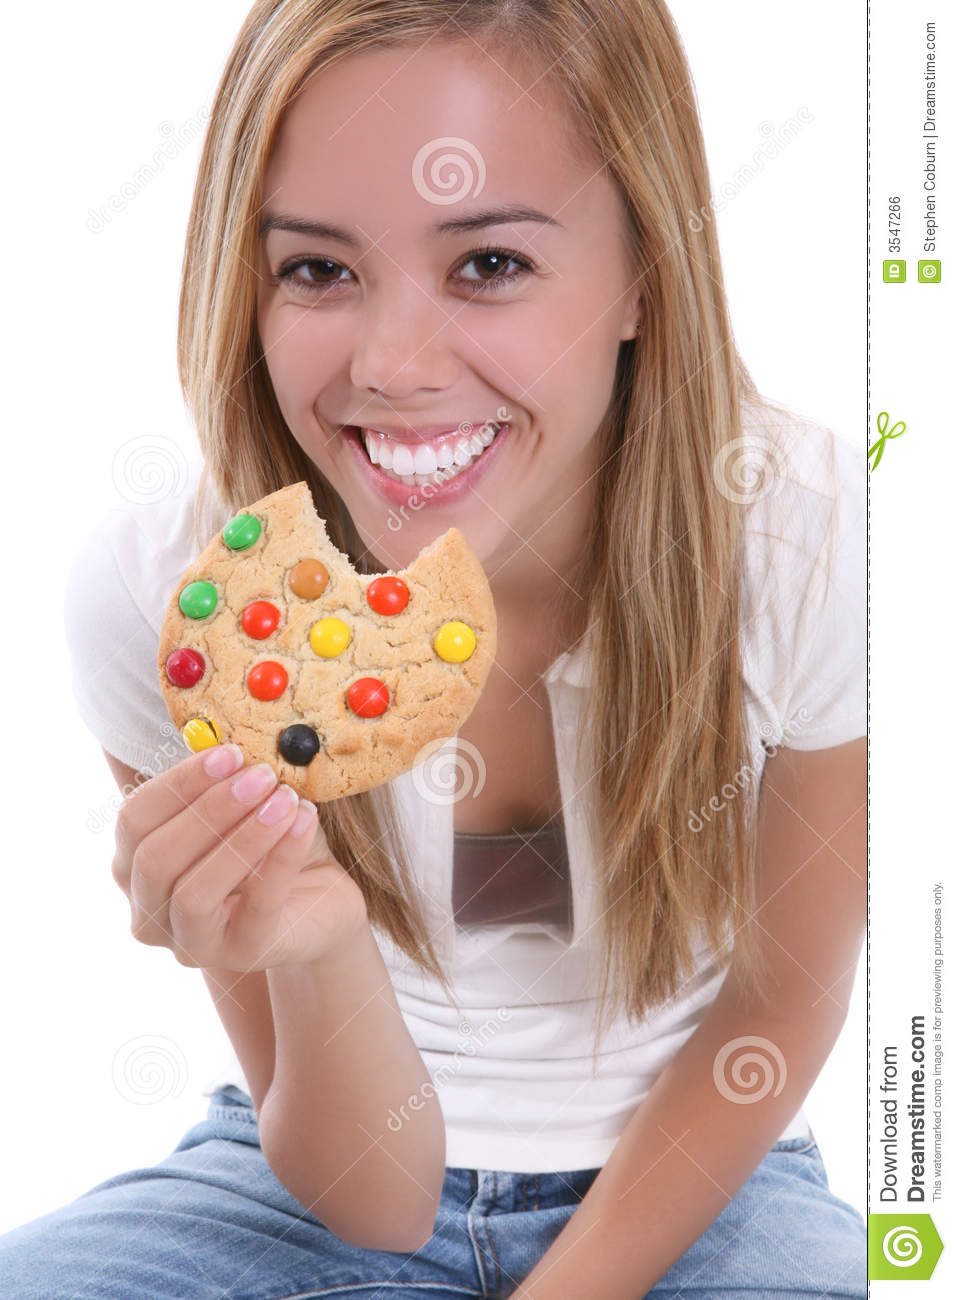 Girl Eating Cookie Royalty Free Stock Image   Image  3547266